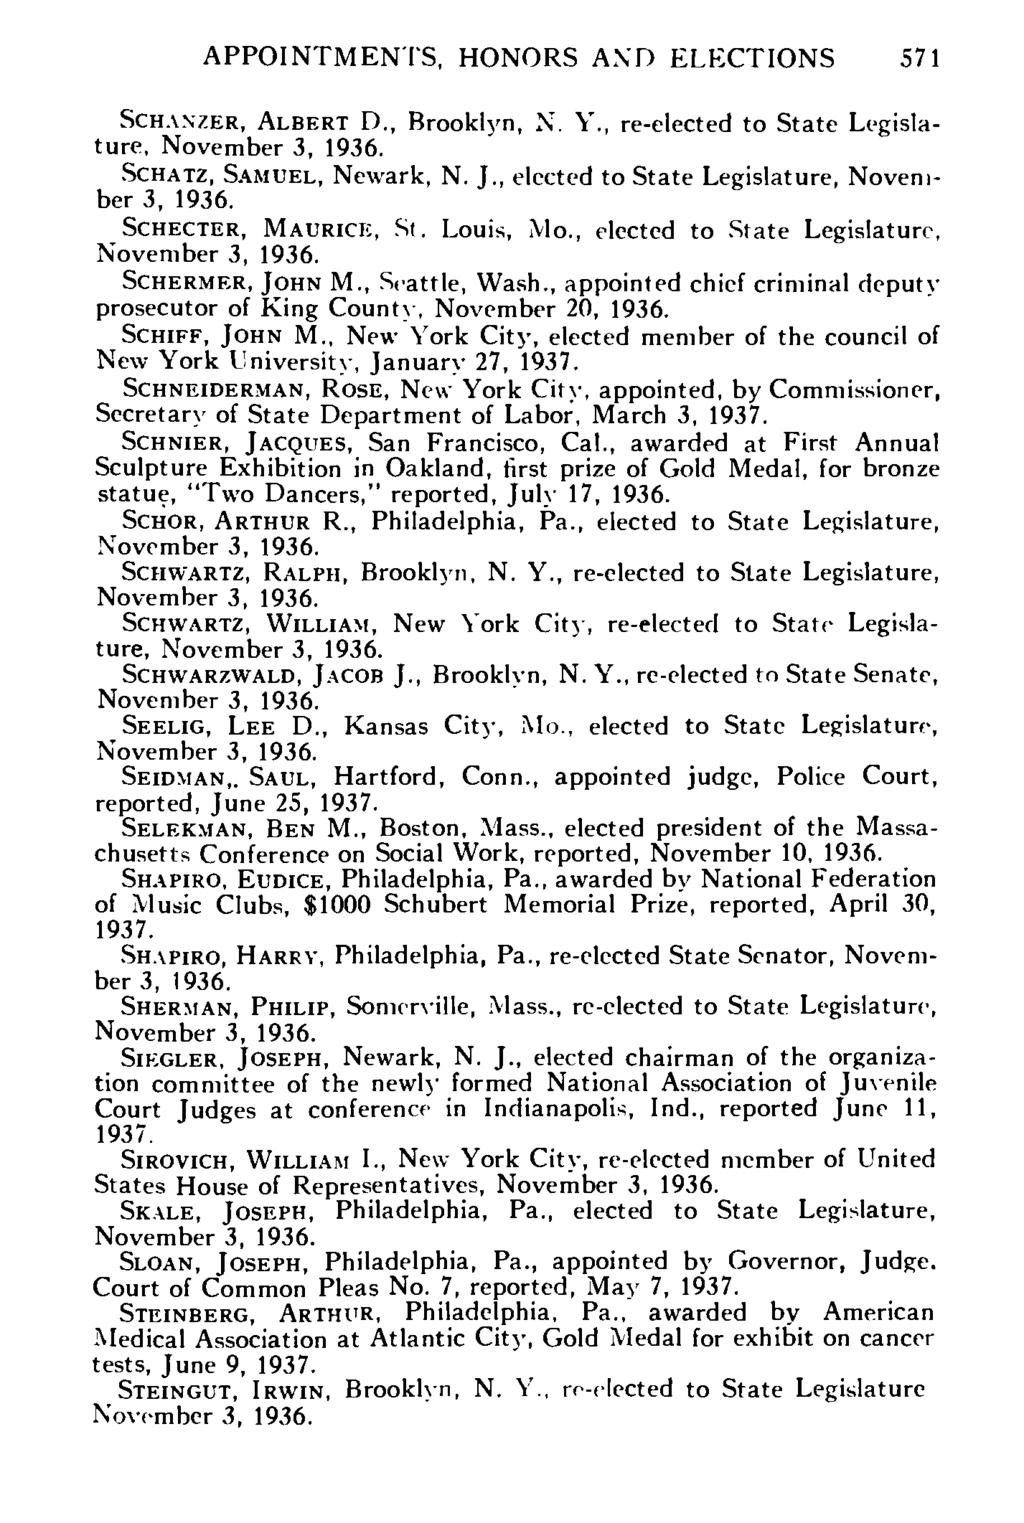 APPOINTMENTS, HONORS AND ELECTIONS 571 SCHANZER, ALBERT D., Brooklyn, X. Y., re-elected to State Legislature, SCHATZ, SAMUEL, Newark, N. I., elected to State Legislature, November 3, 1936.